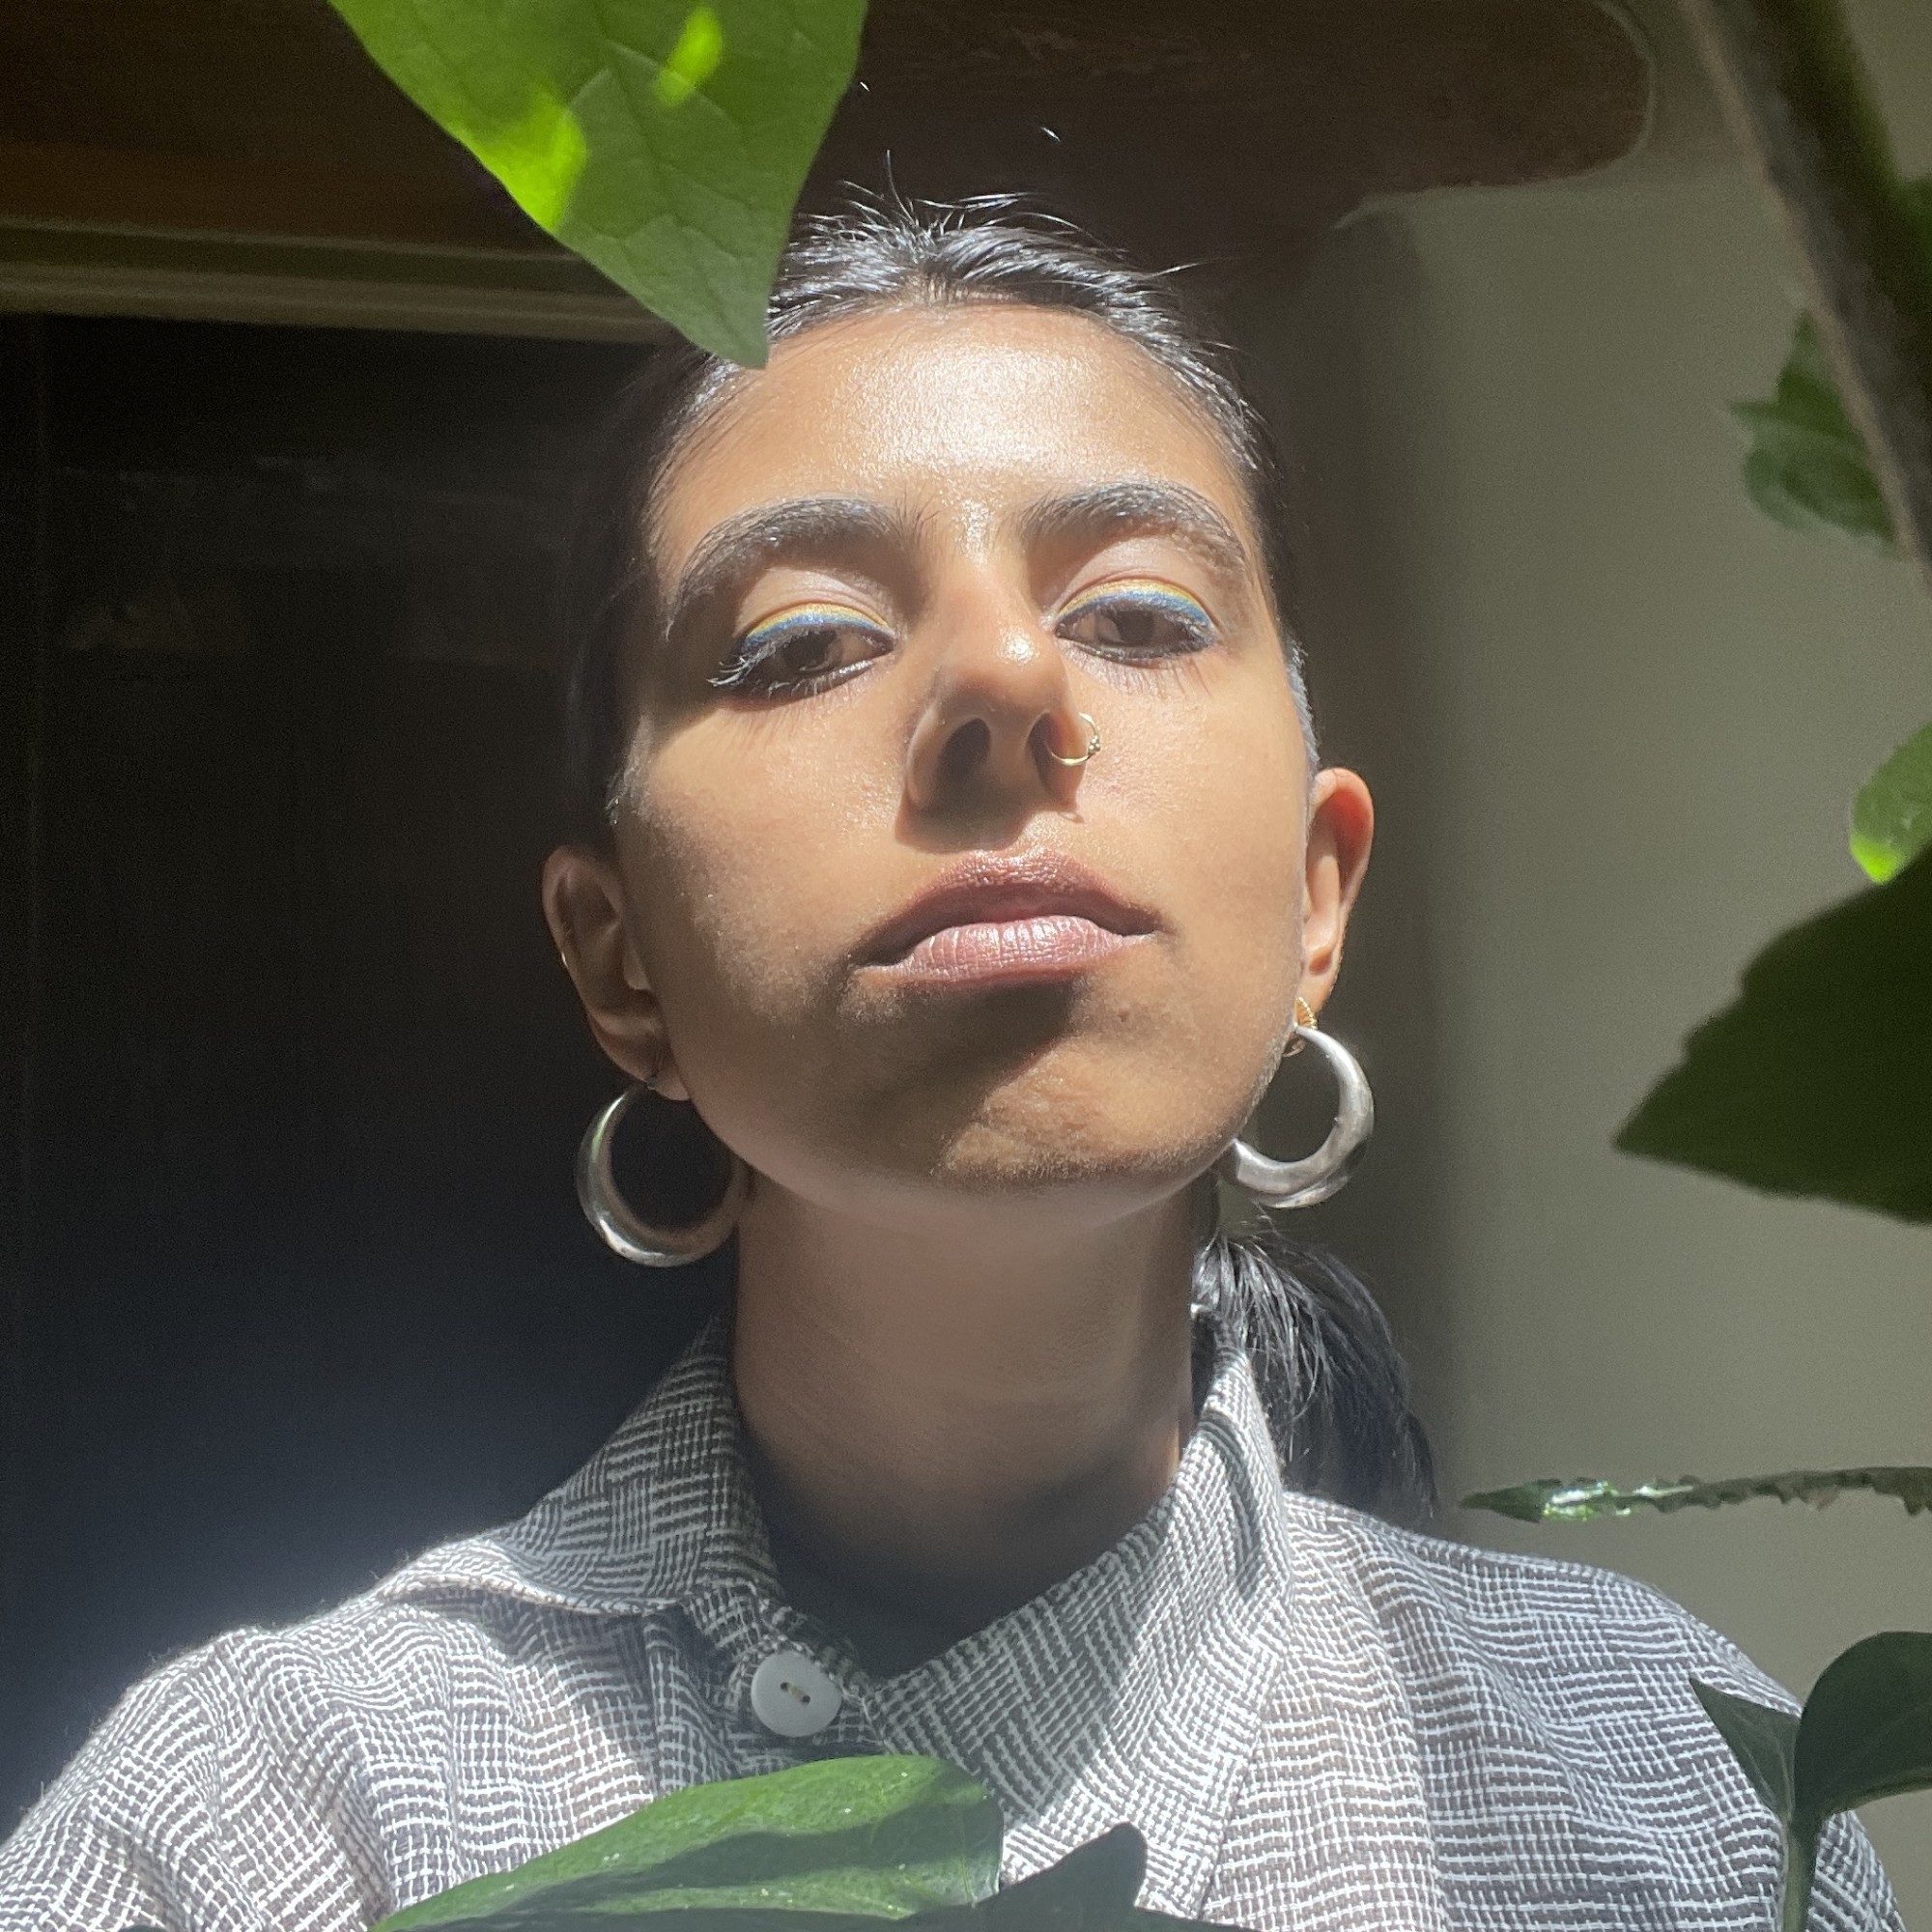 Mallika Singh is standing in bright light next to a plant with large green leaves, wearing hoop earrings.